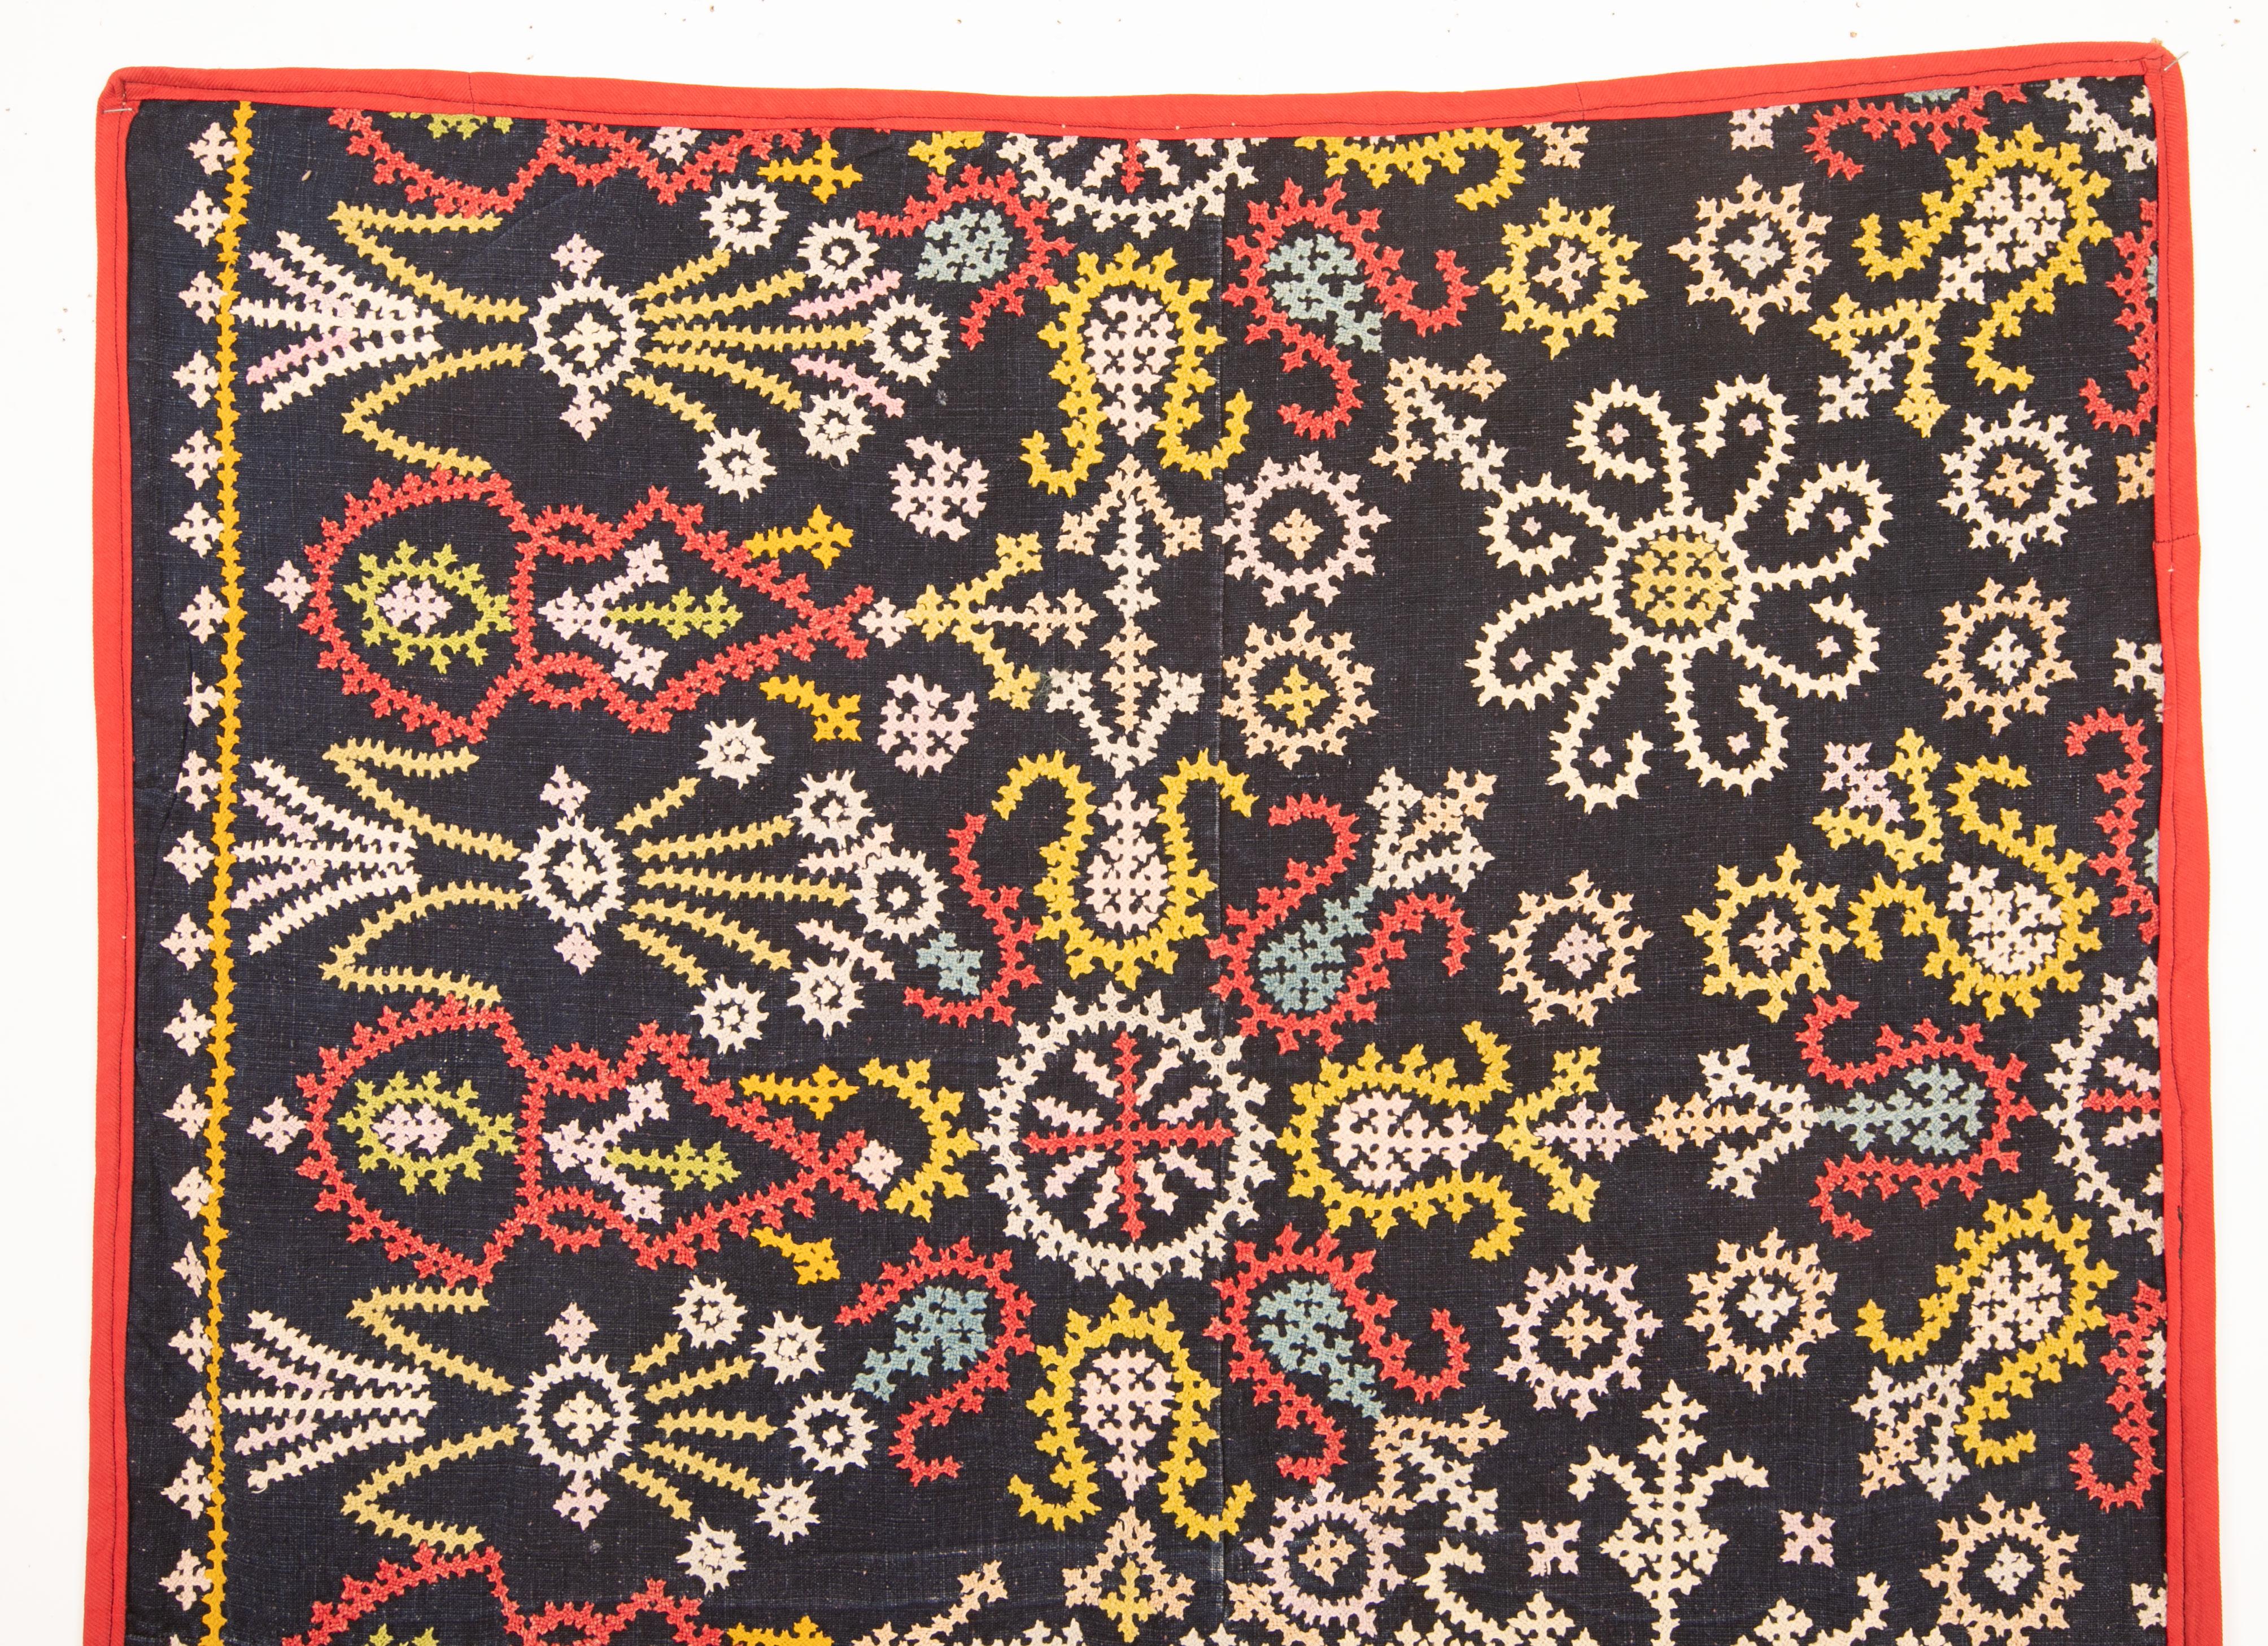 A rare item to come by. It is as good as they get with great colors. Too bad that it is a fragment but visually it is so satisfying.
Armenian Marash Embroidery.